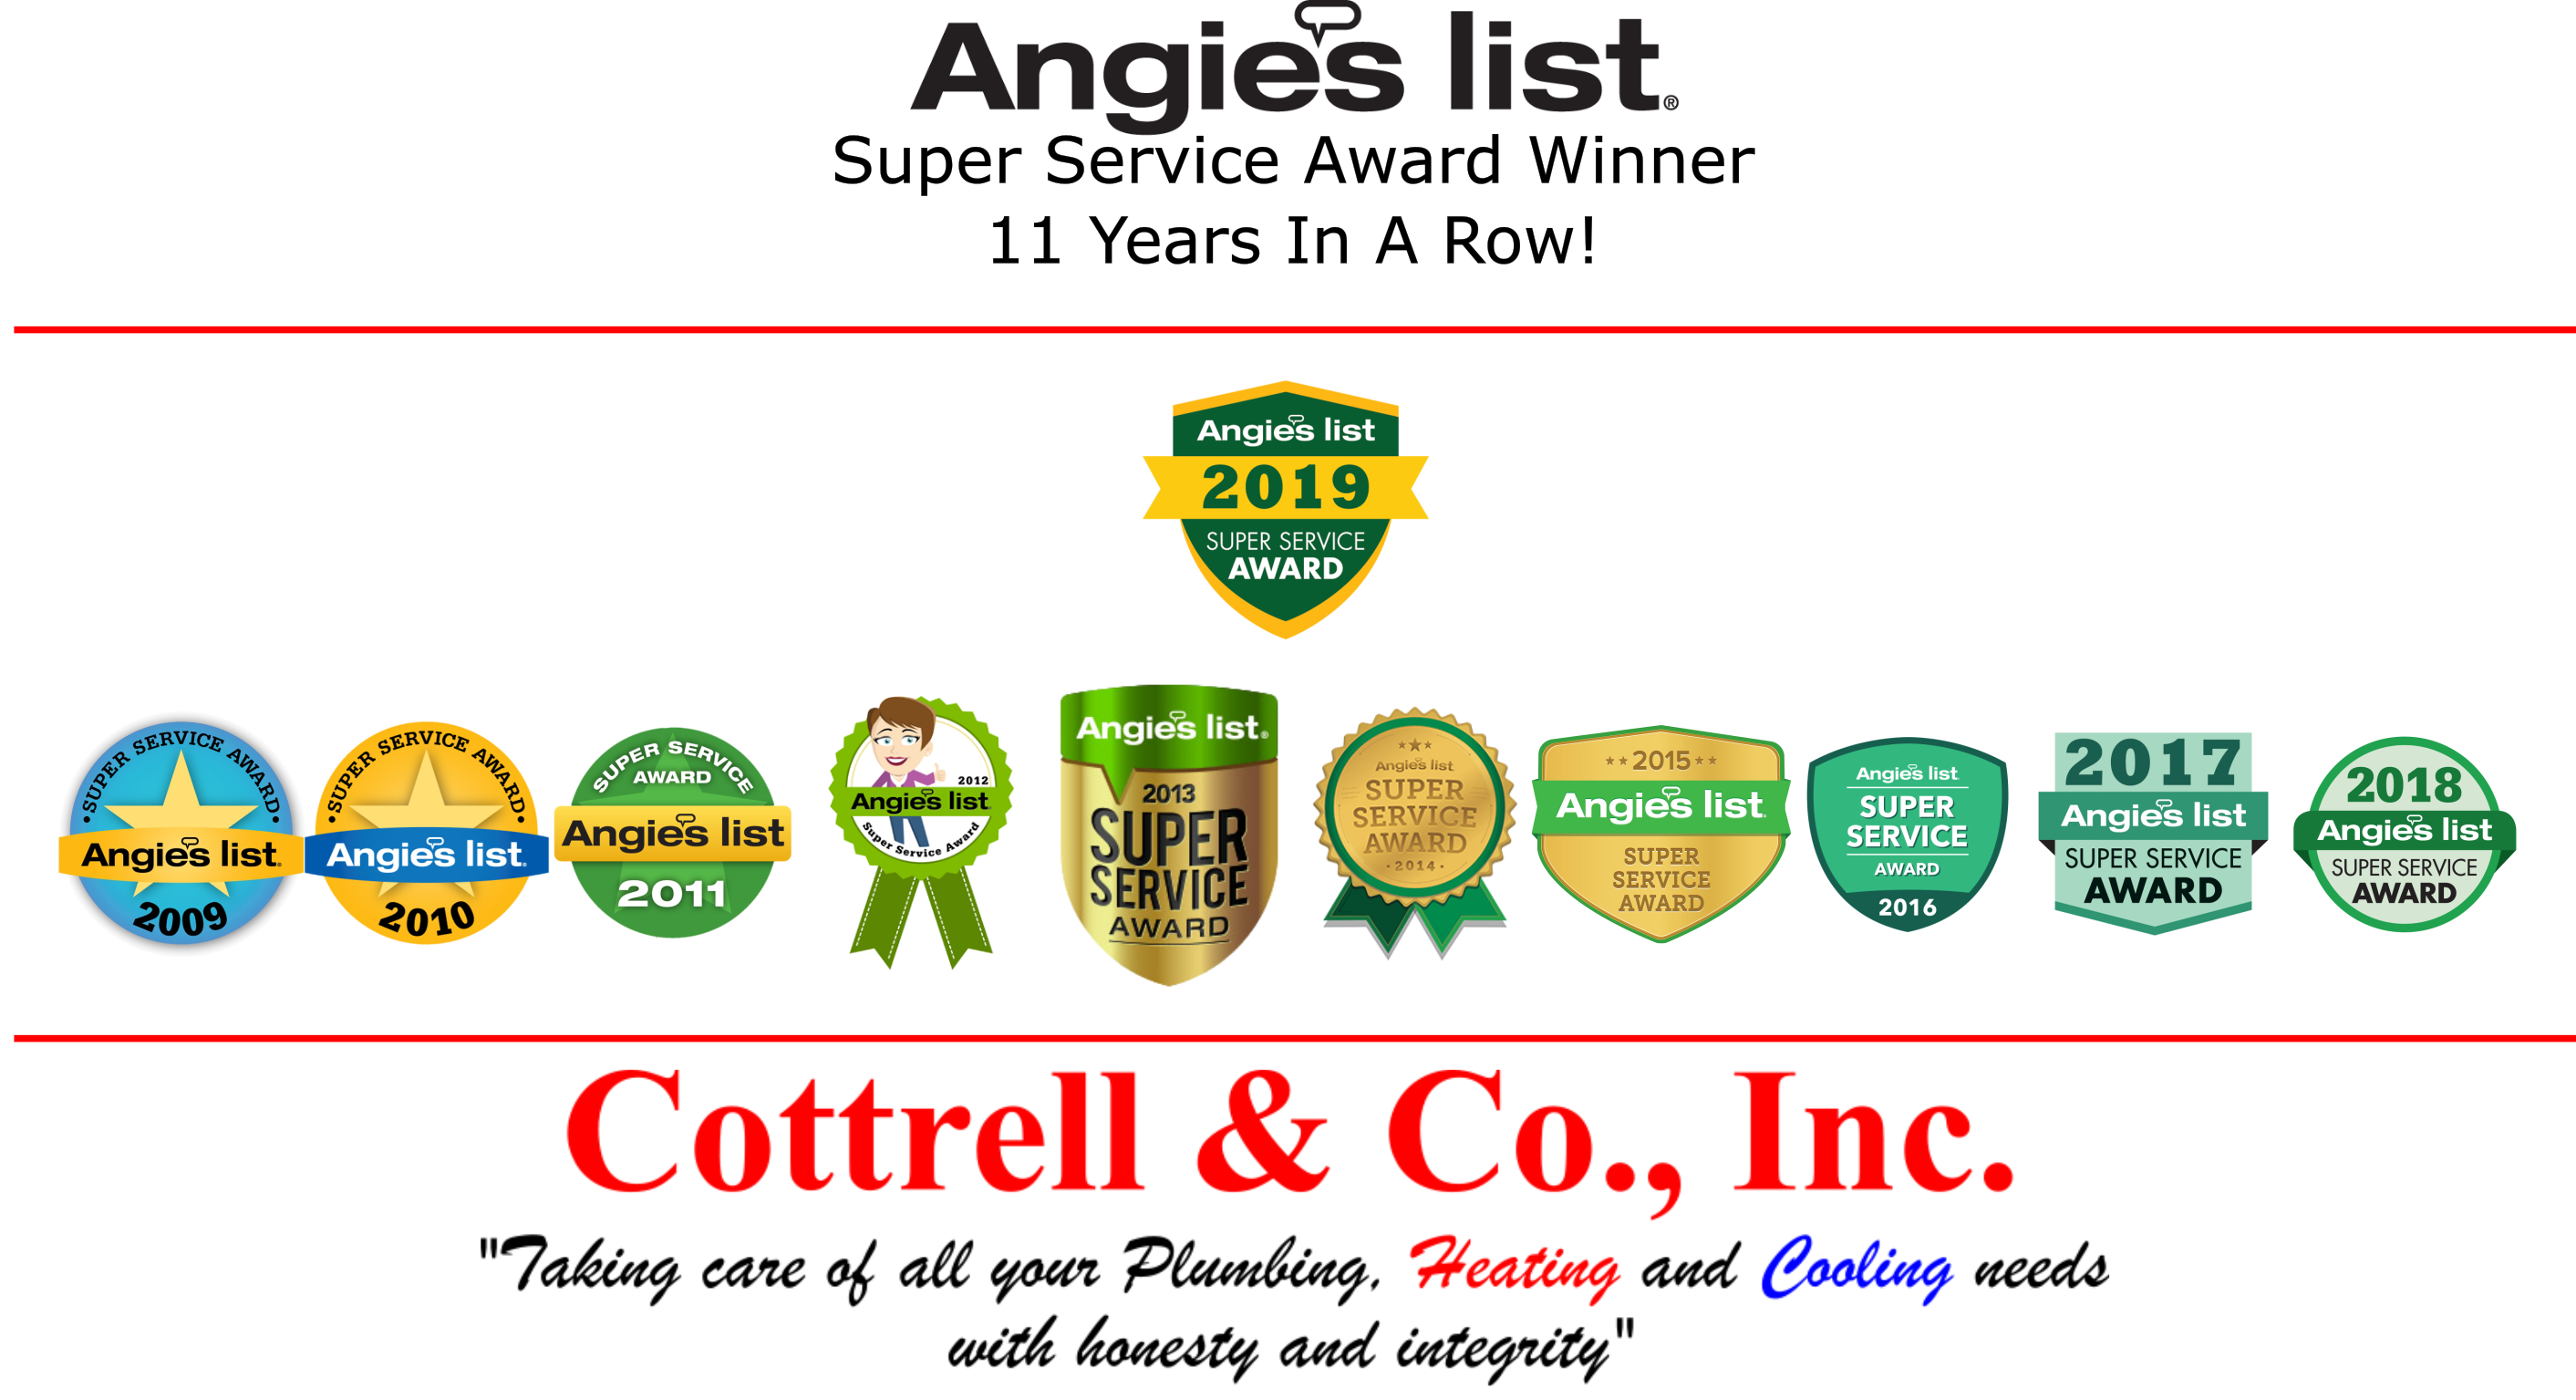 Cottrell & Co., Inc. Plumbing, Heating and Air Conditioning | Super Service Award 9 Years In A Row